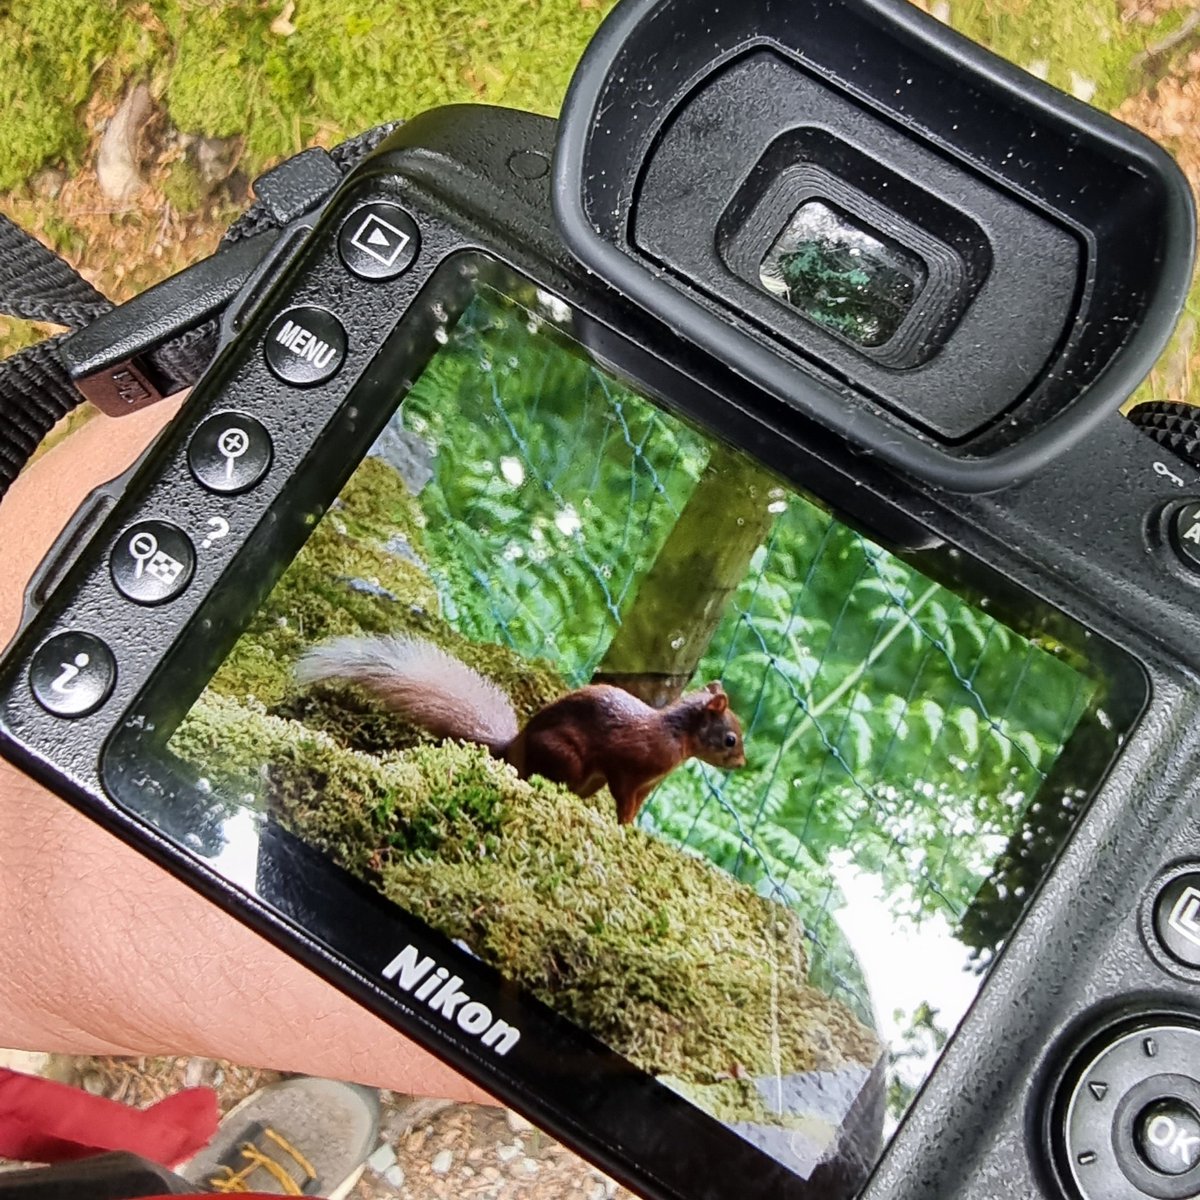 Lovely to see the red squirrels at Allan Bank and looking forward to getting the pics on the laptop when home in a few days.

@nationaltrust @GrasmereRed #grasmere #redsquirrels #allanbank #wildlife #nature